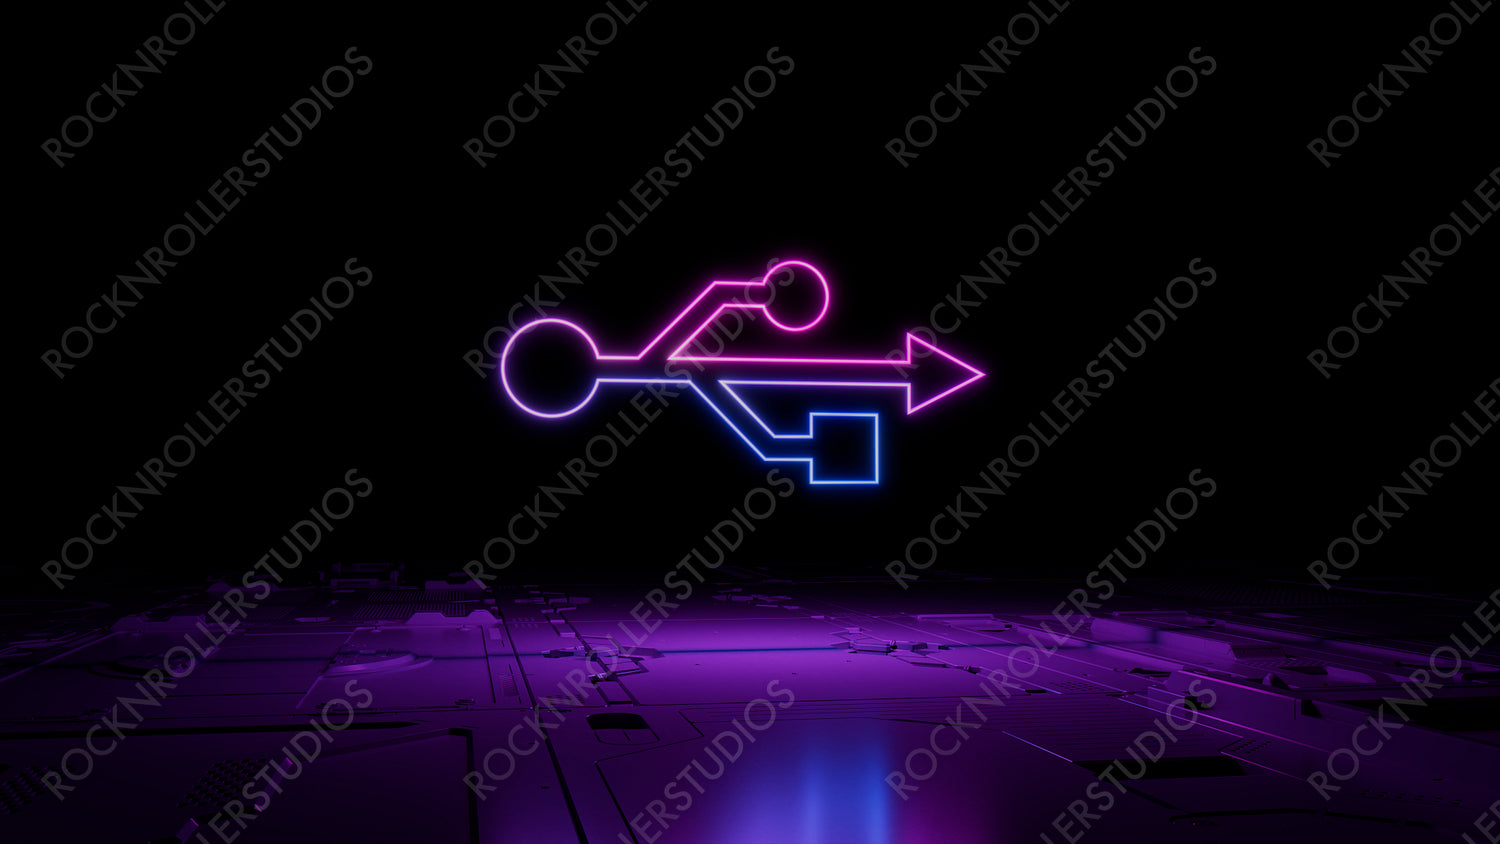 Pink and Blue neon light usb icon. Vibrant colored Interface technology symbol, on a black background with high tech floor. 3D Render